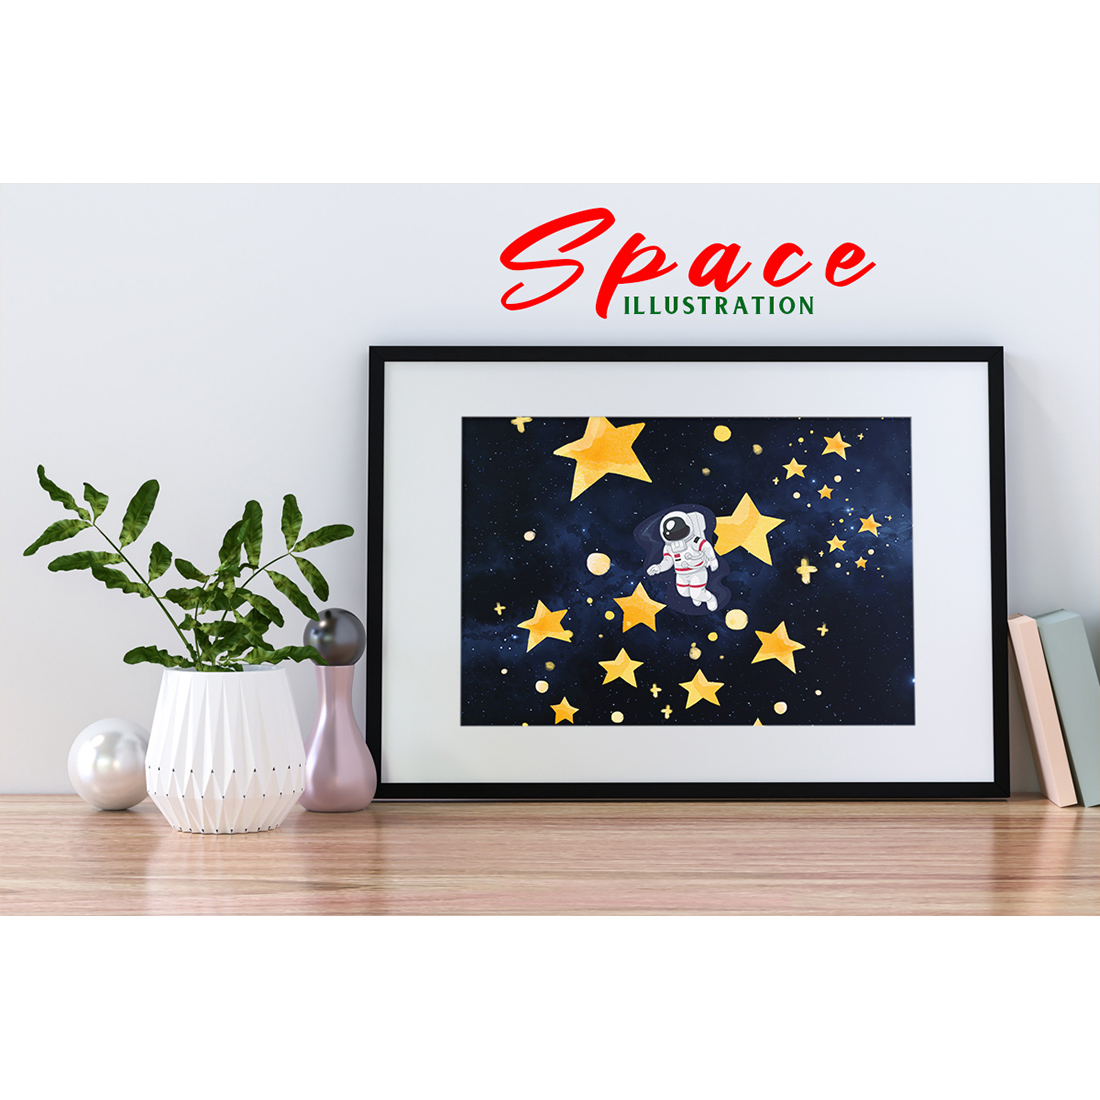 Amazing picture on the theme of space in a frame